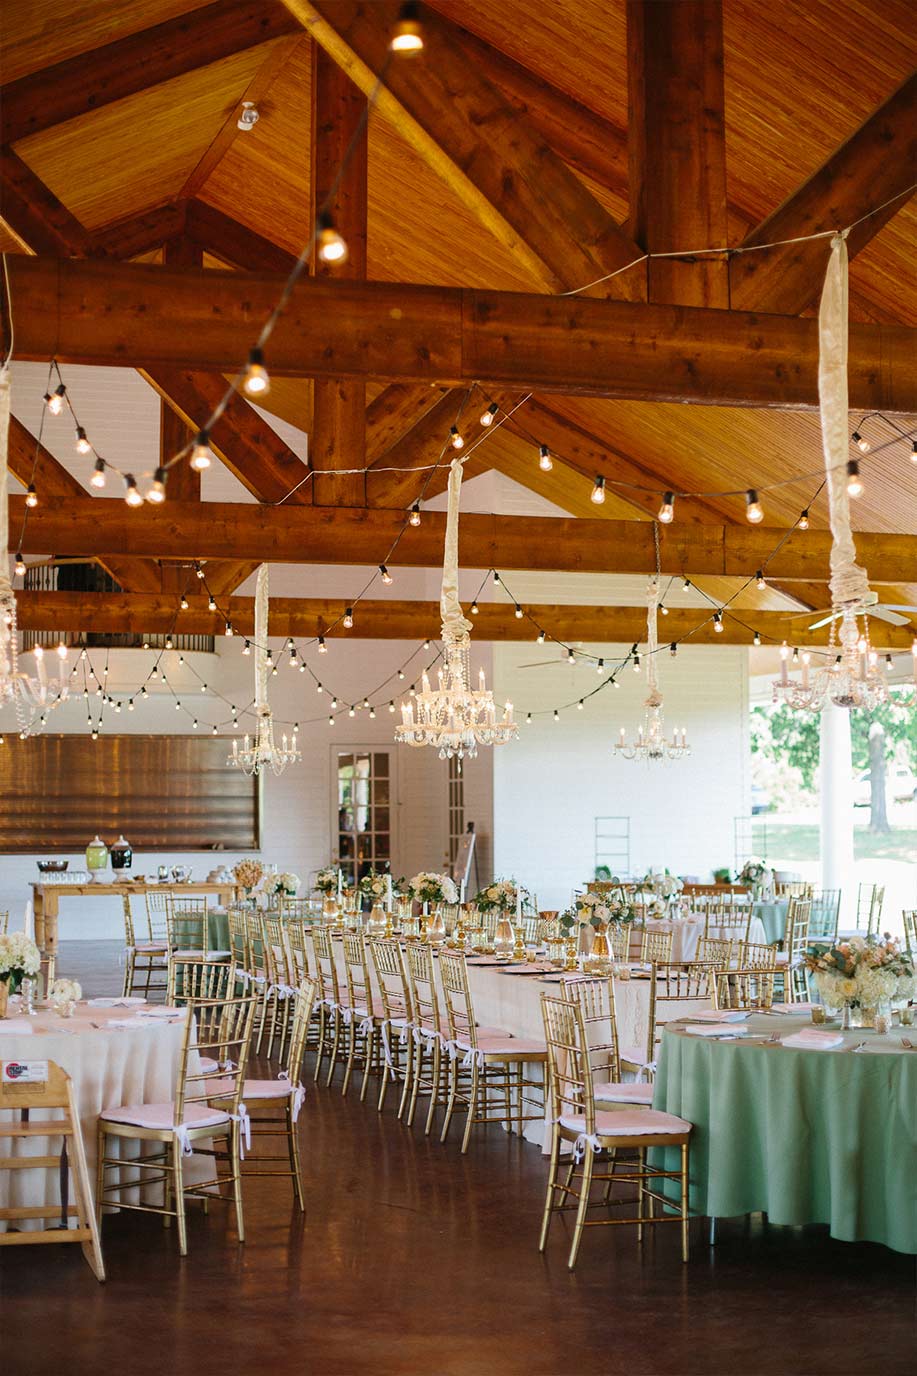 White Oaks Ranch wedding reception setup with gold chiavari chairs, chandeliers, wooden beams, and cafe lights